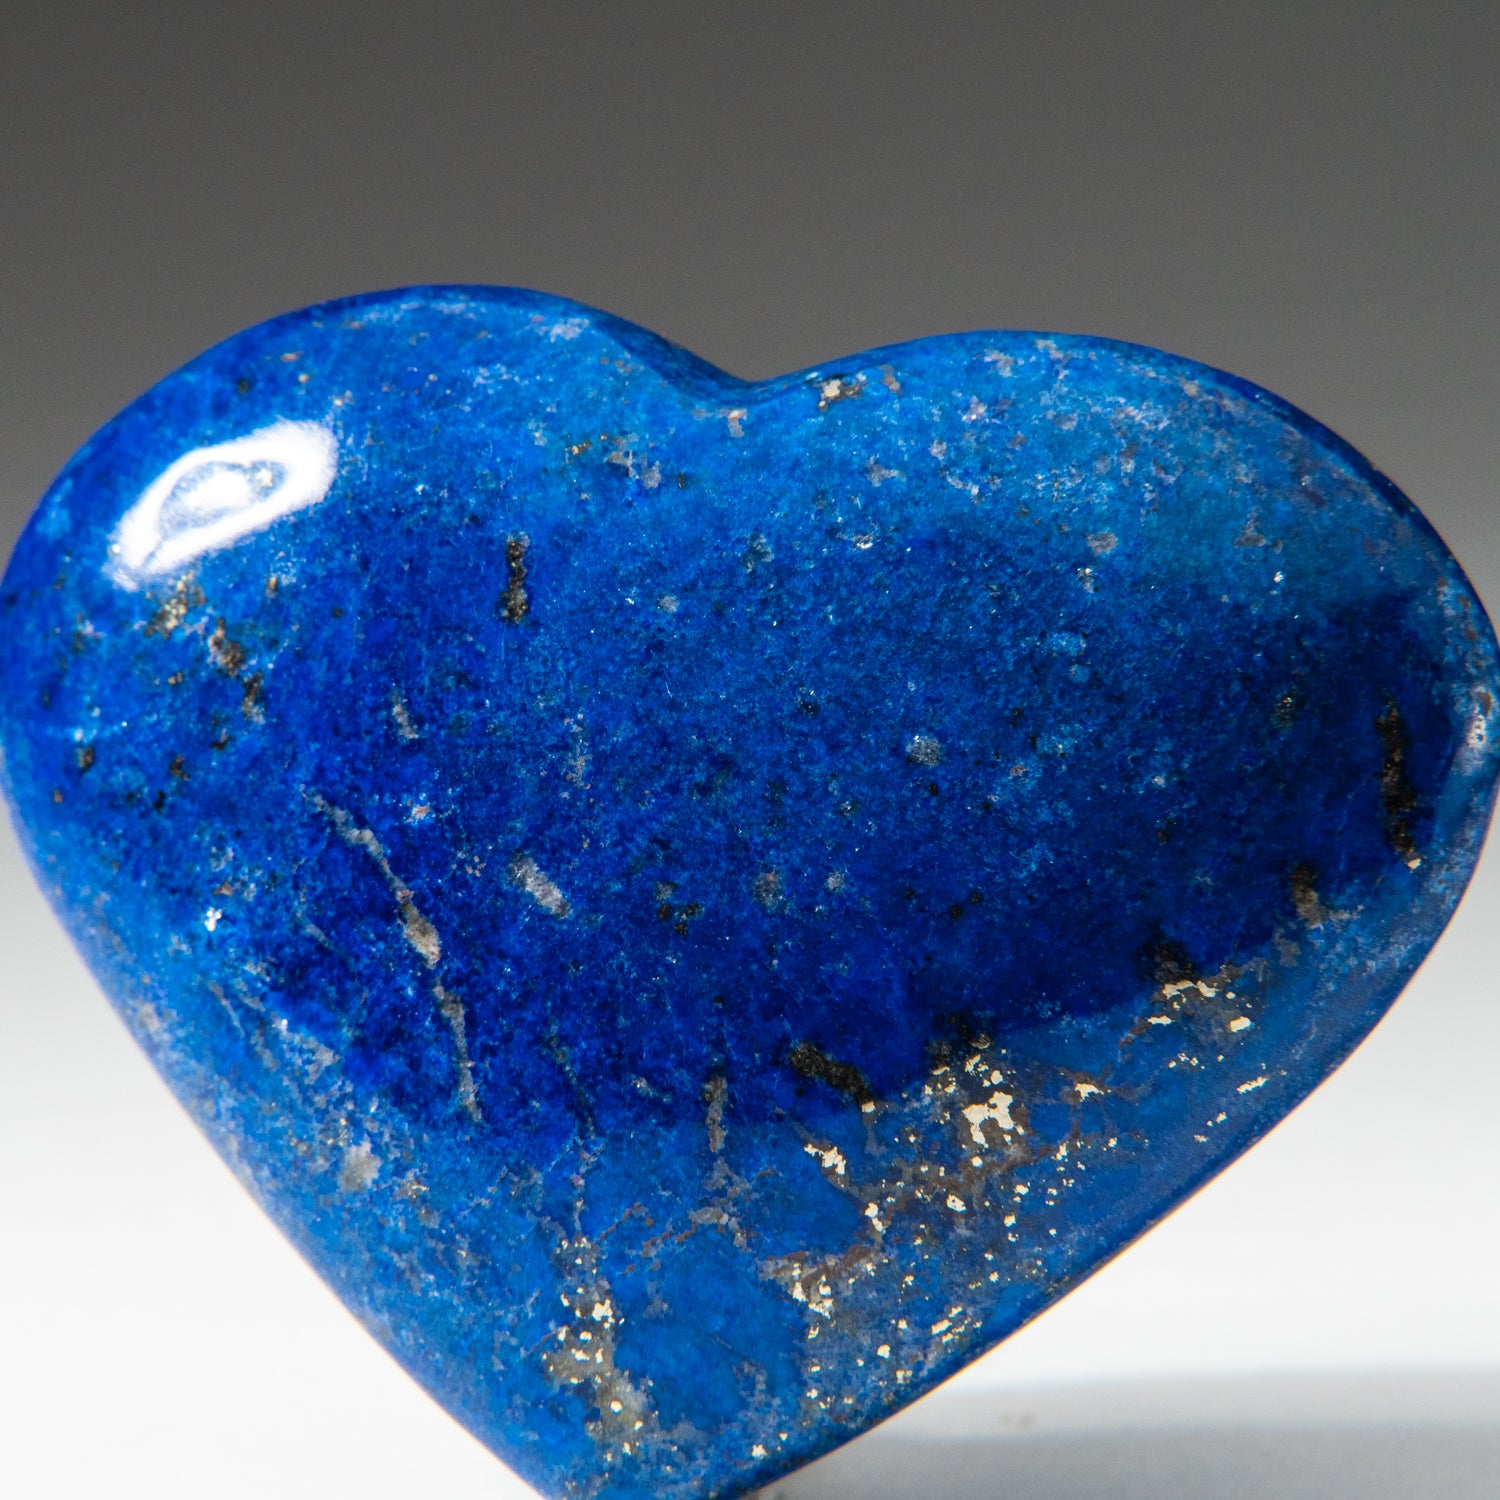 Polished Lapis Lazuli Heart from Afghanistan (60 grams)